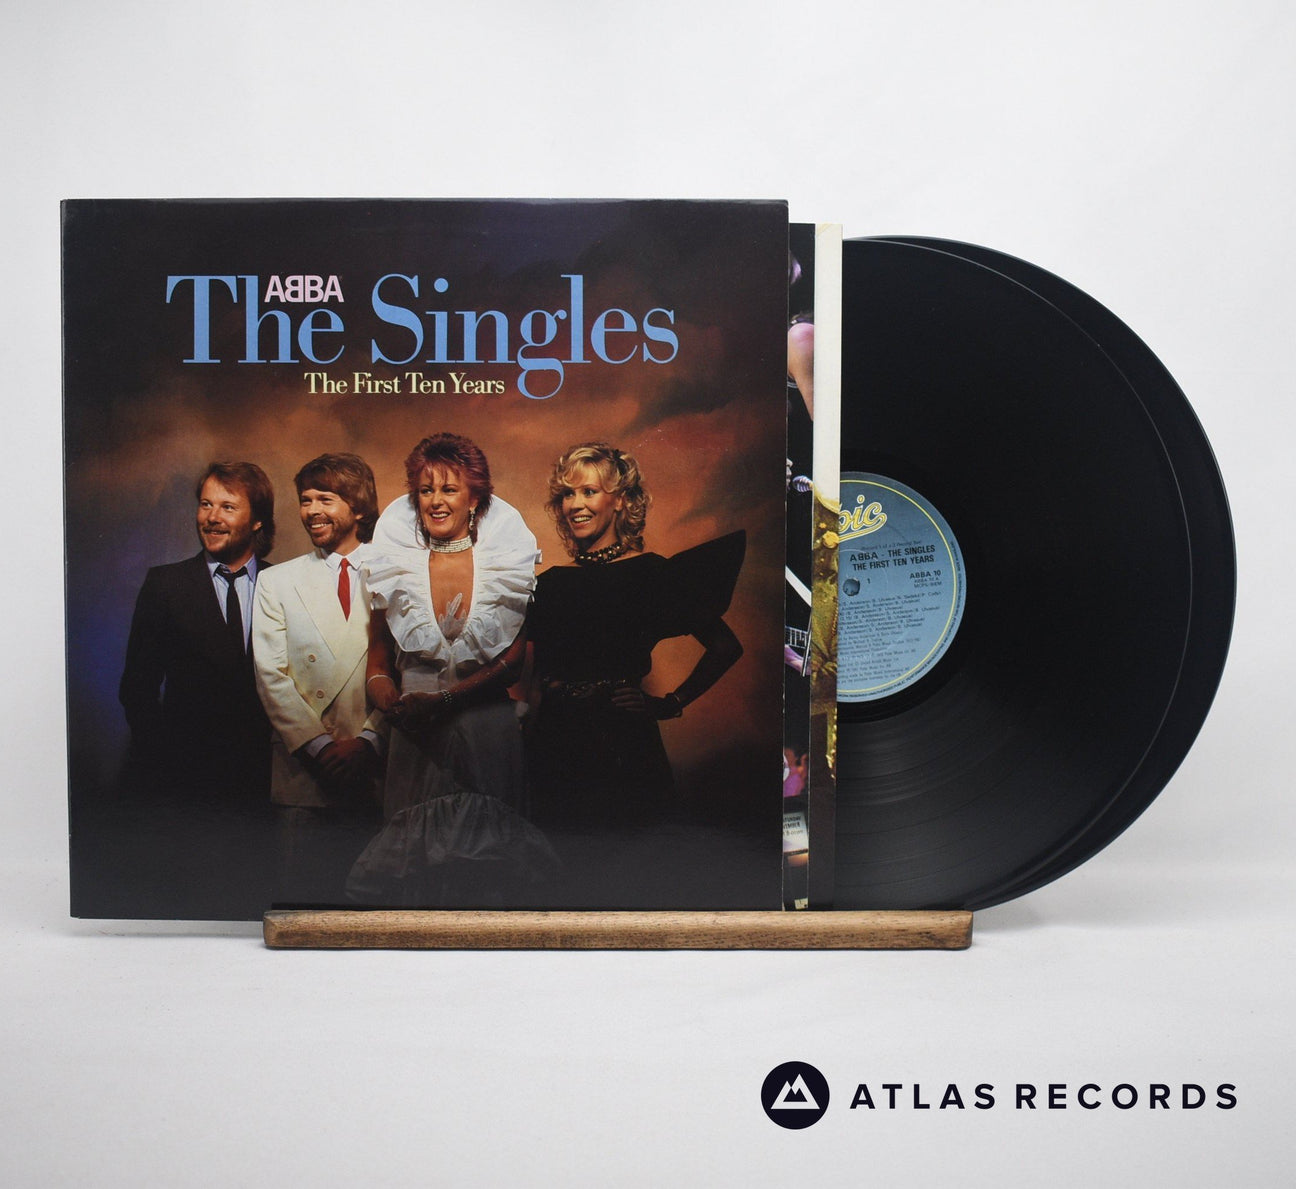 ABBA The Singles - The First Ten Years Double LP Vinyl Record - Front Cover & Record